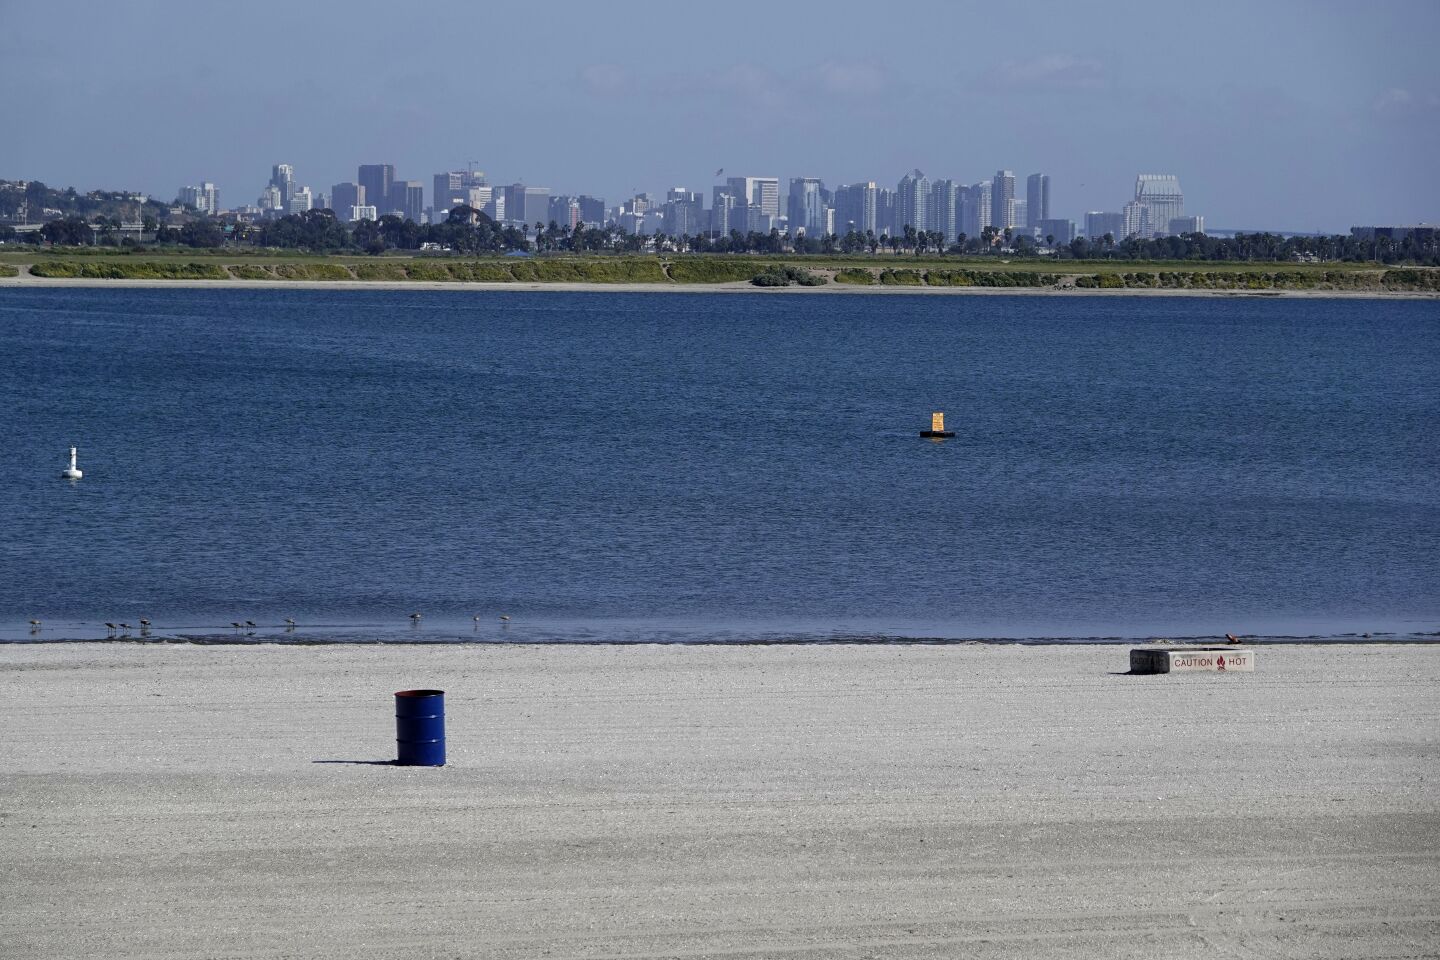 Mission Bay, which would be busy with boaters on a nice Sunday afternoon, was closed due to the coronavirus on March 29, 2020. San Diego beaches, bays, and parks were recently close to the public.